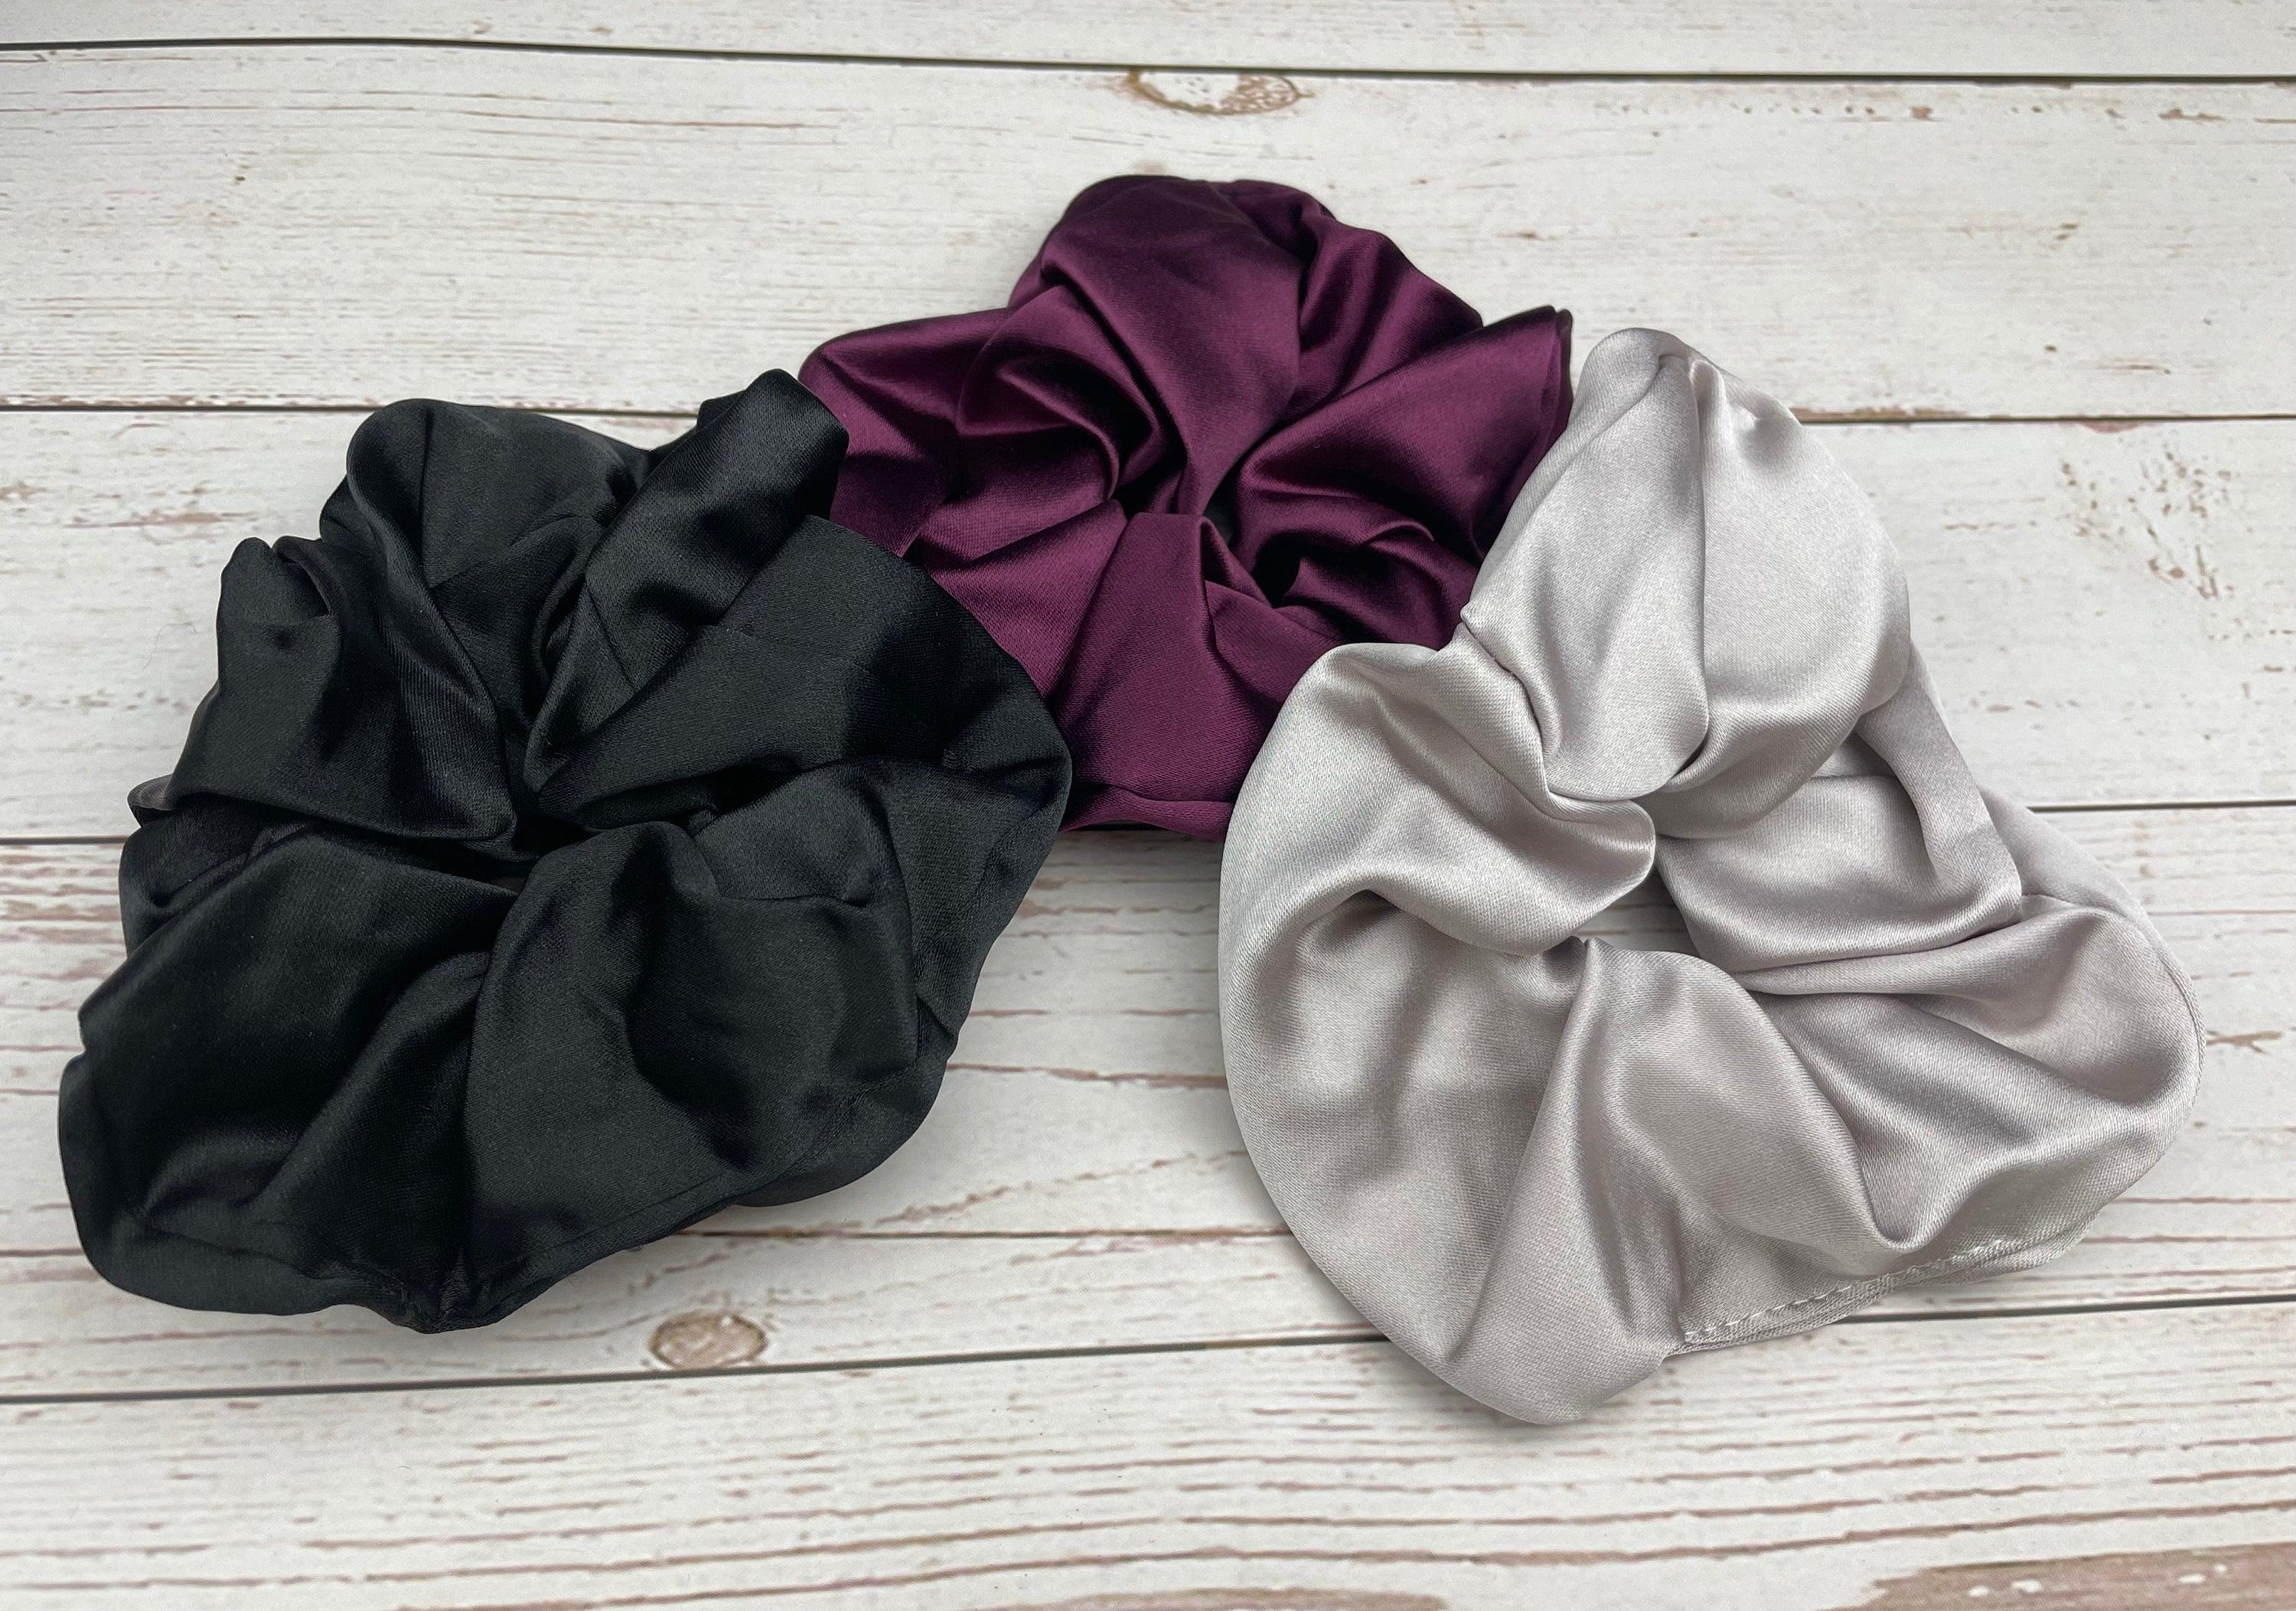 Unique Handmade Satin Scrunchie with Bow, Colorful Scrunchie, Hair Accessory, Hair Ties, Black Beige Maroon Color Scrunchies, Satin Hairbow available at Moyoni Design